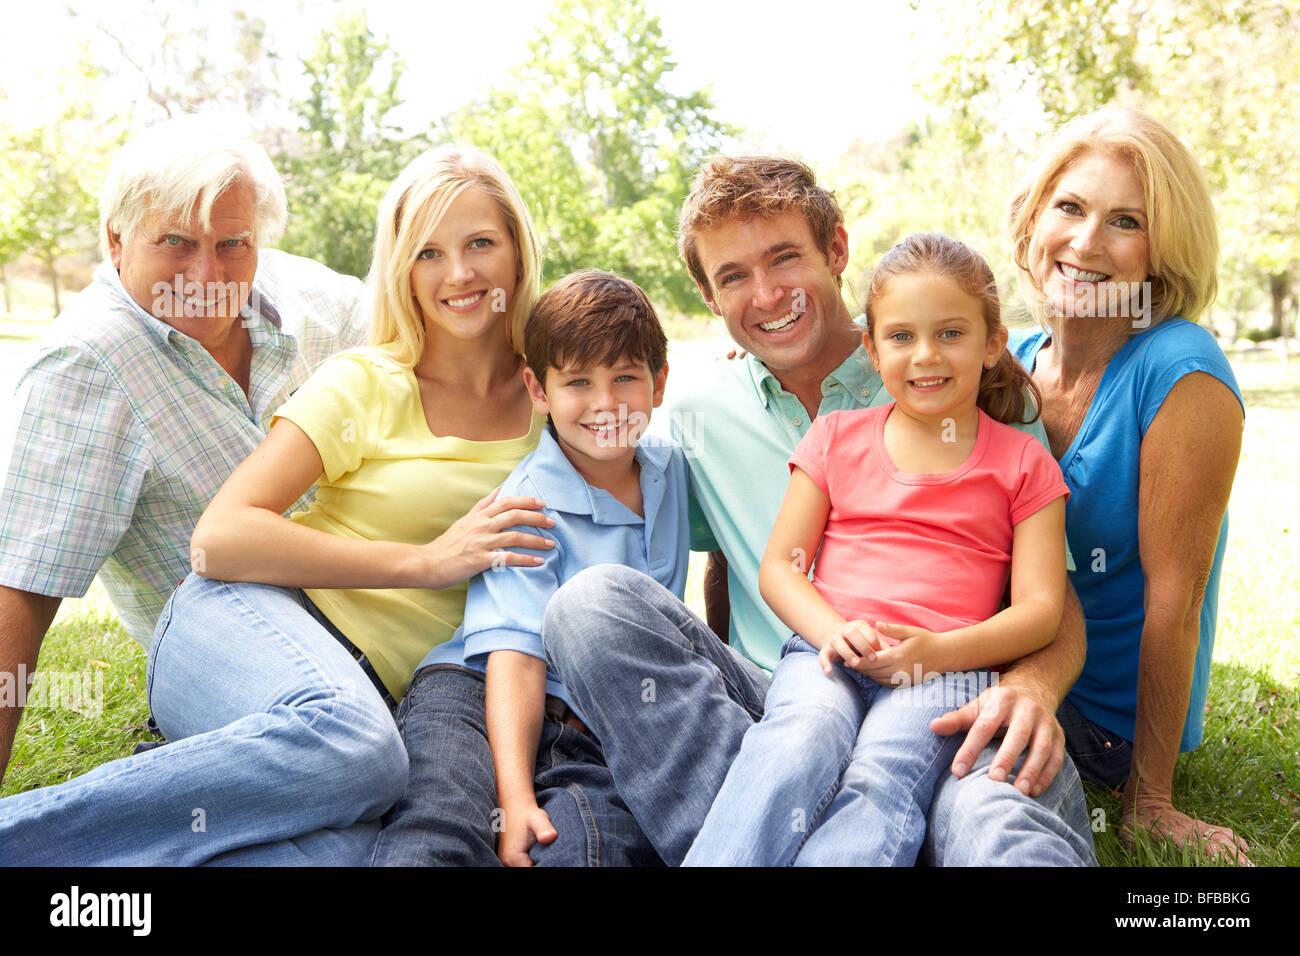 Extended Group Portrait Of Family Enjoying Day In Park Stock Photo